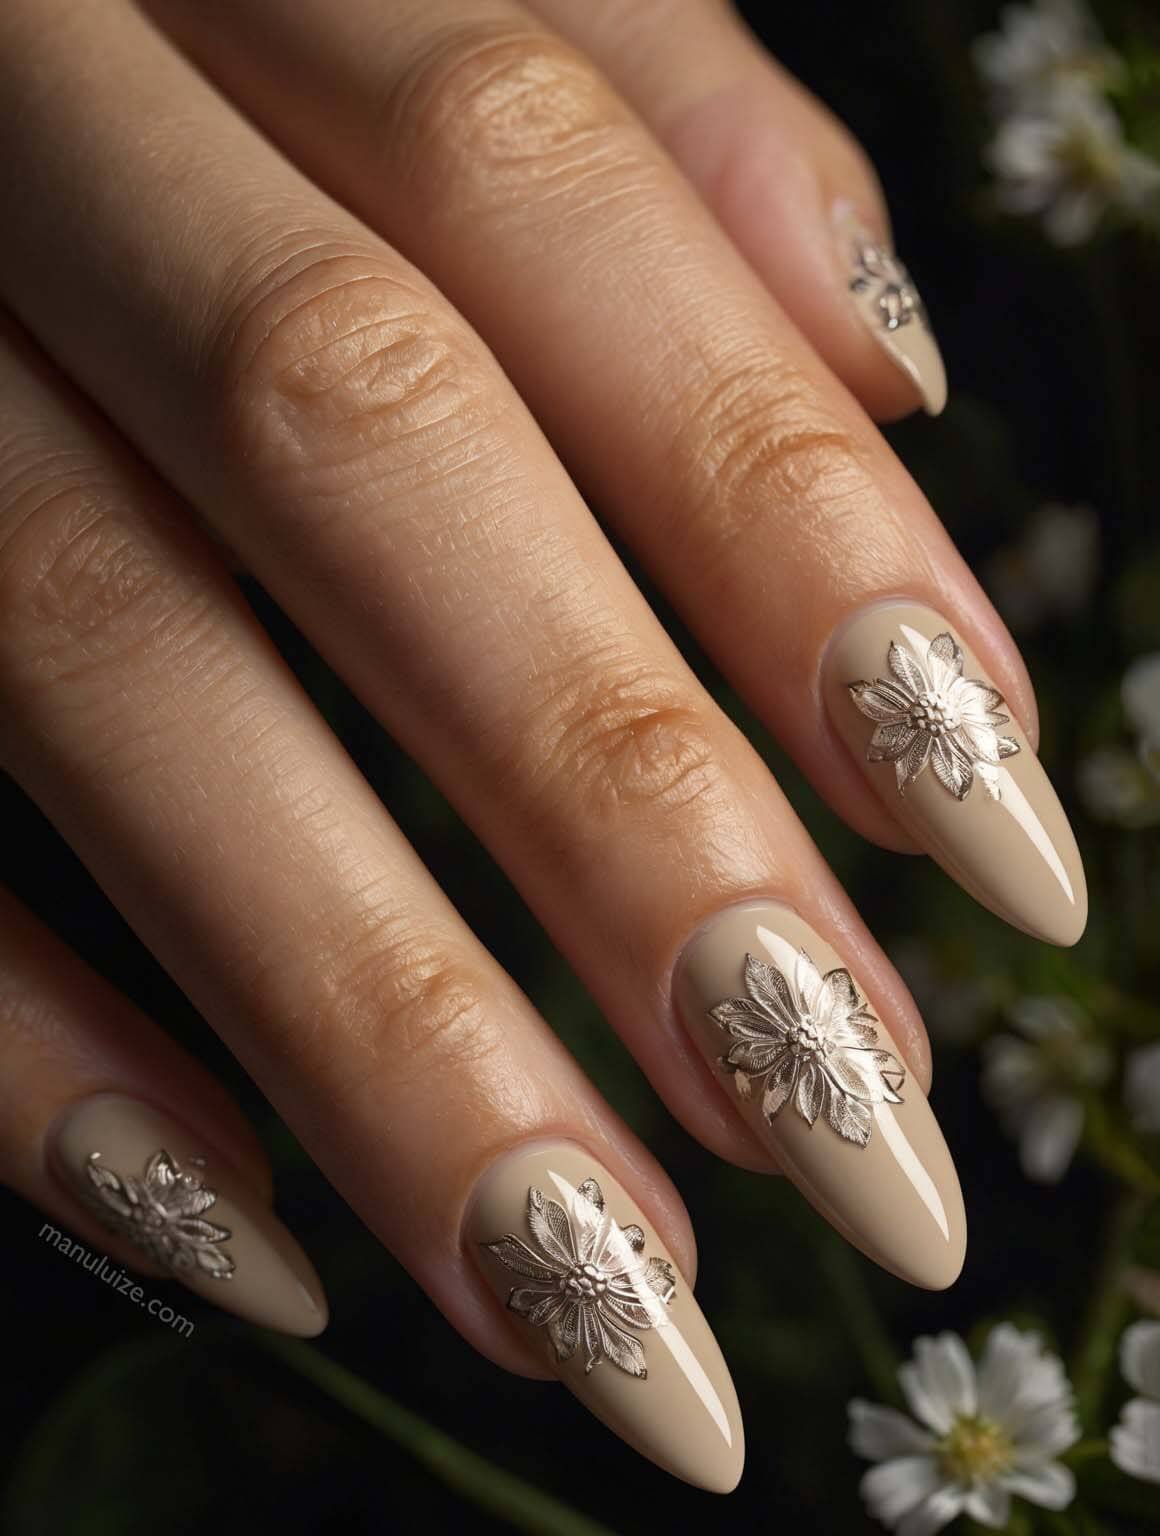 Nude nails with silver flowers